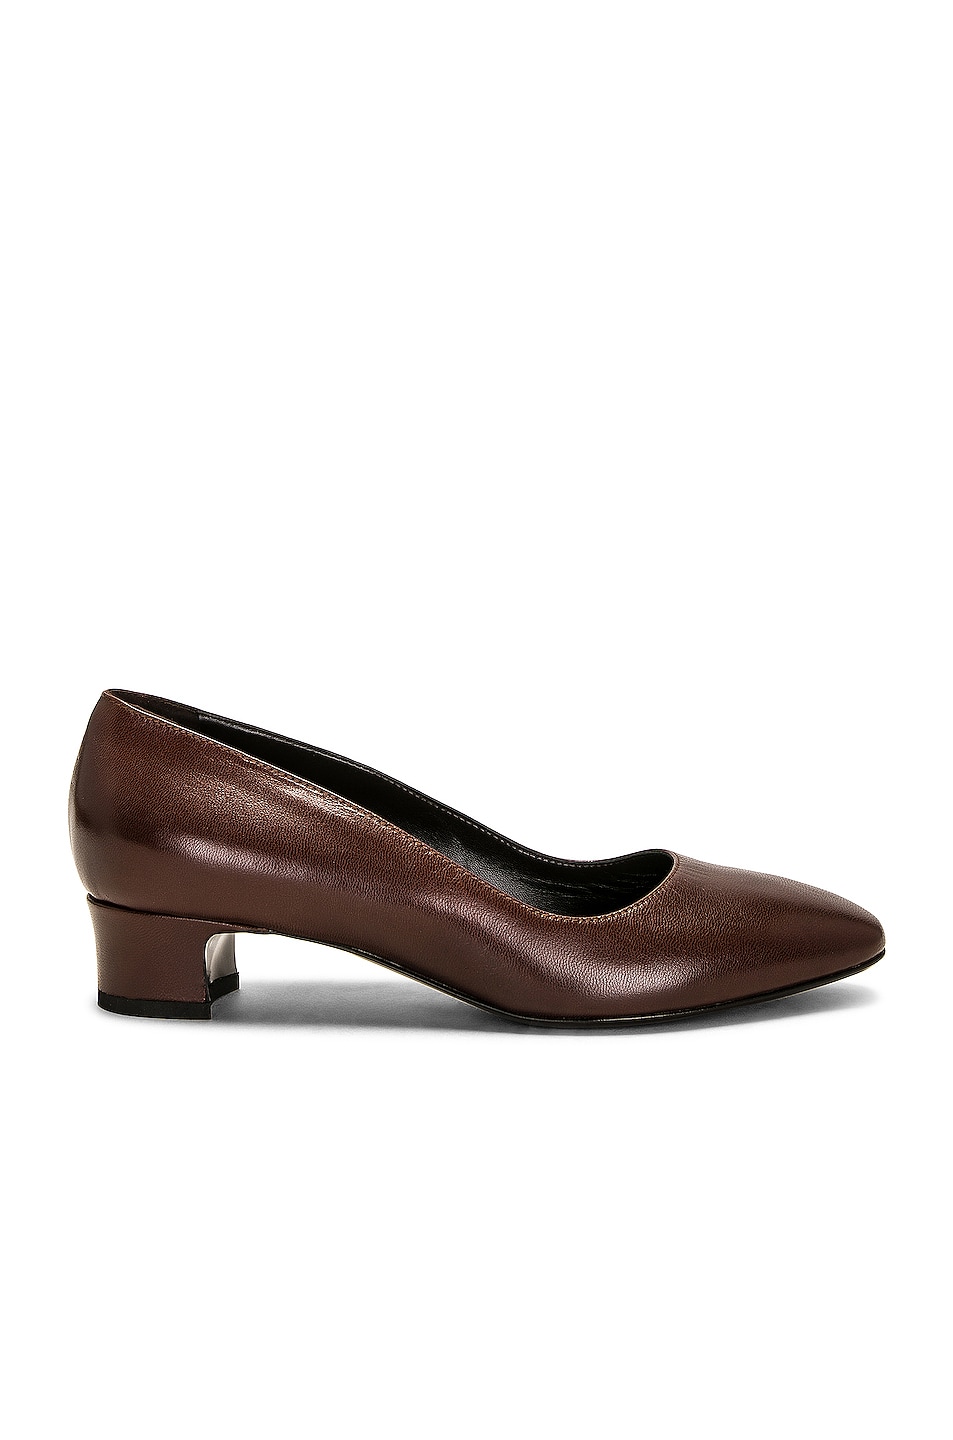 Image 1 of The Row Luisa Pump in Hickory